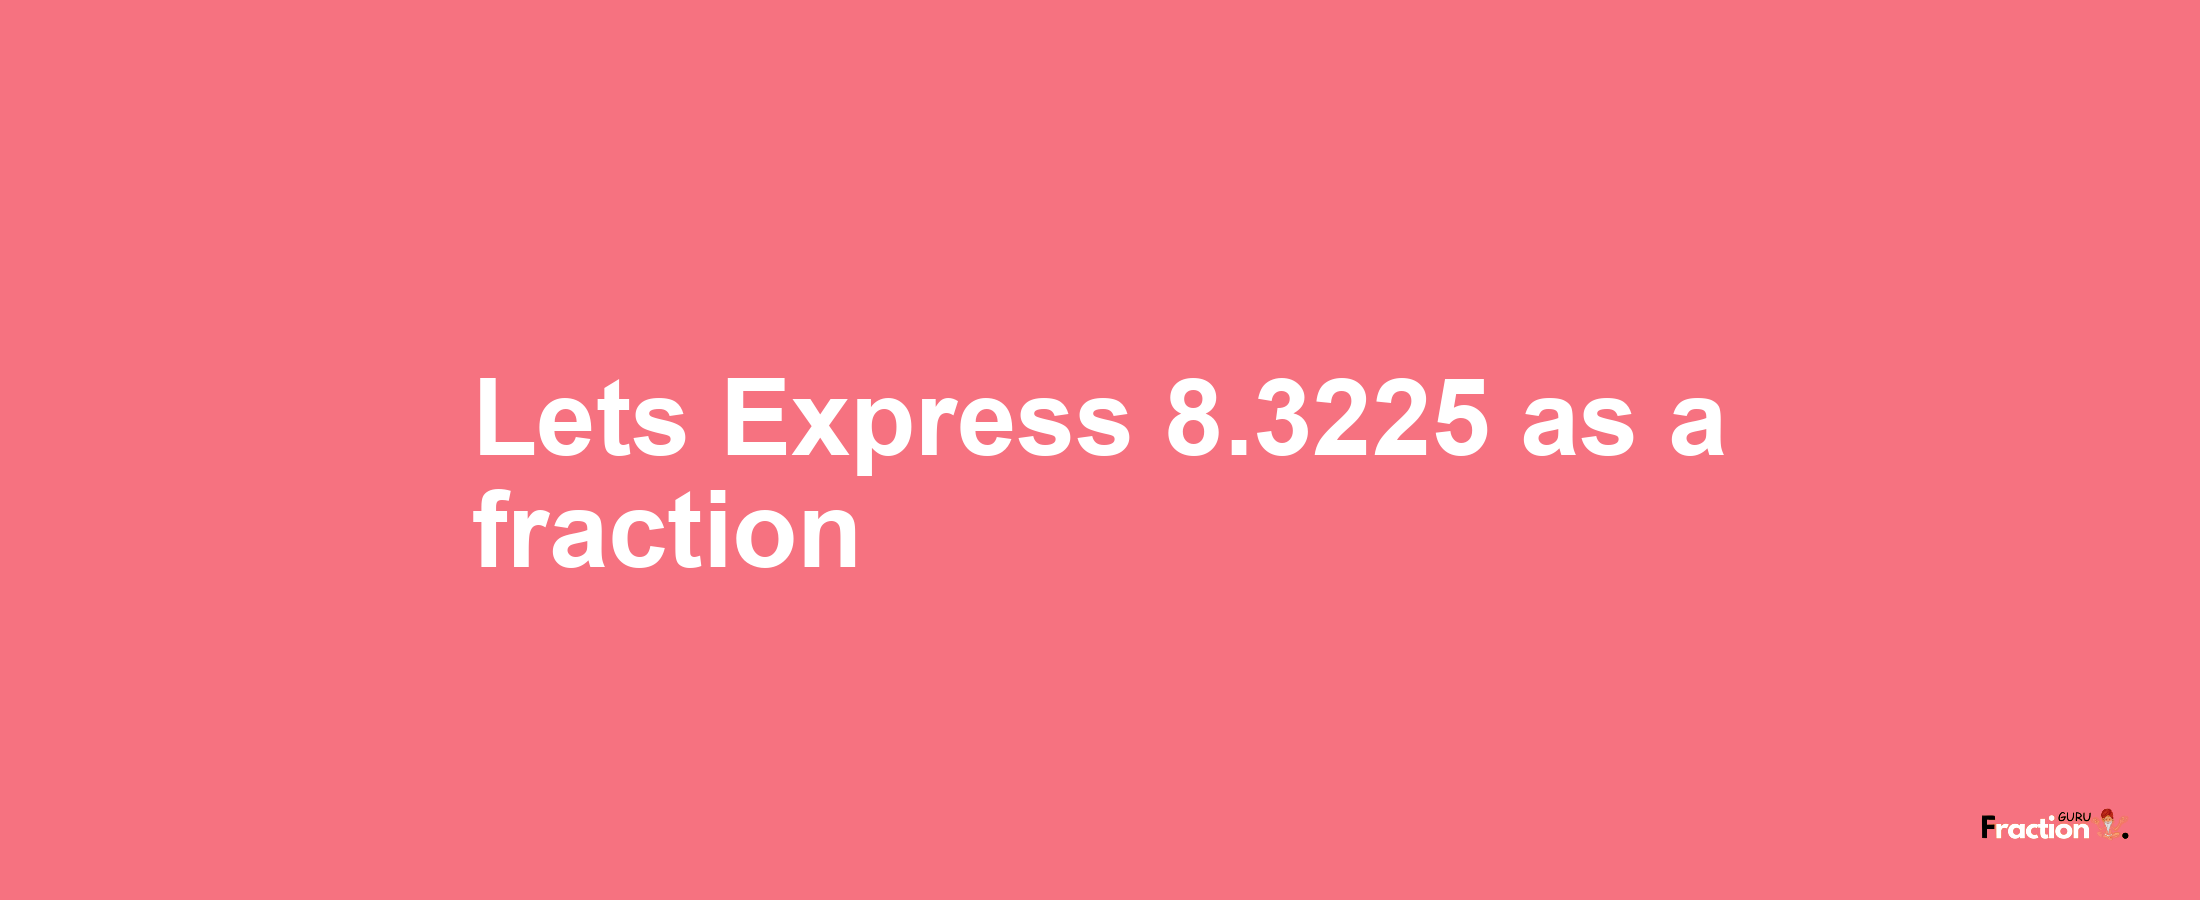 Lets Express 8.3225 as afraction